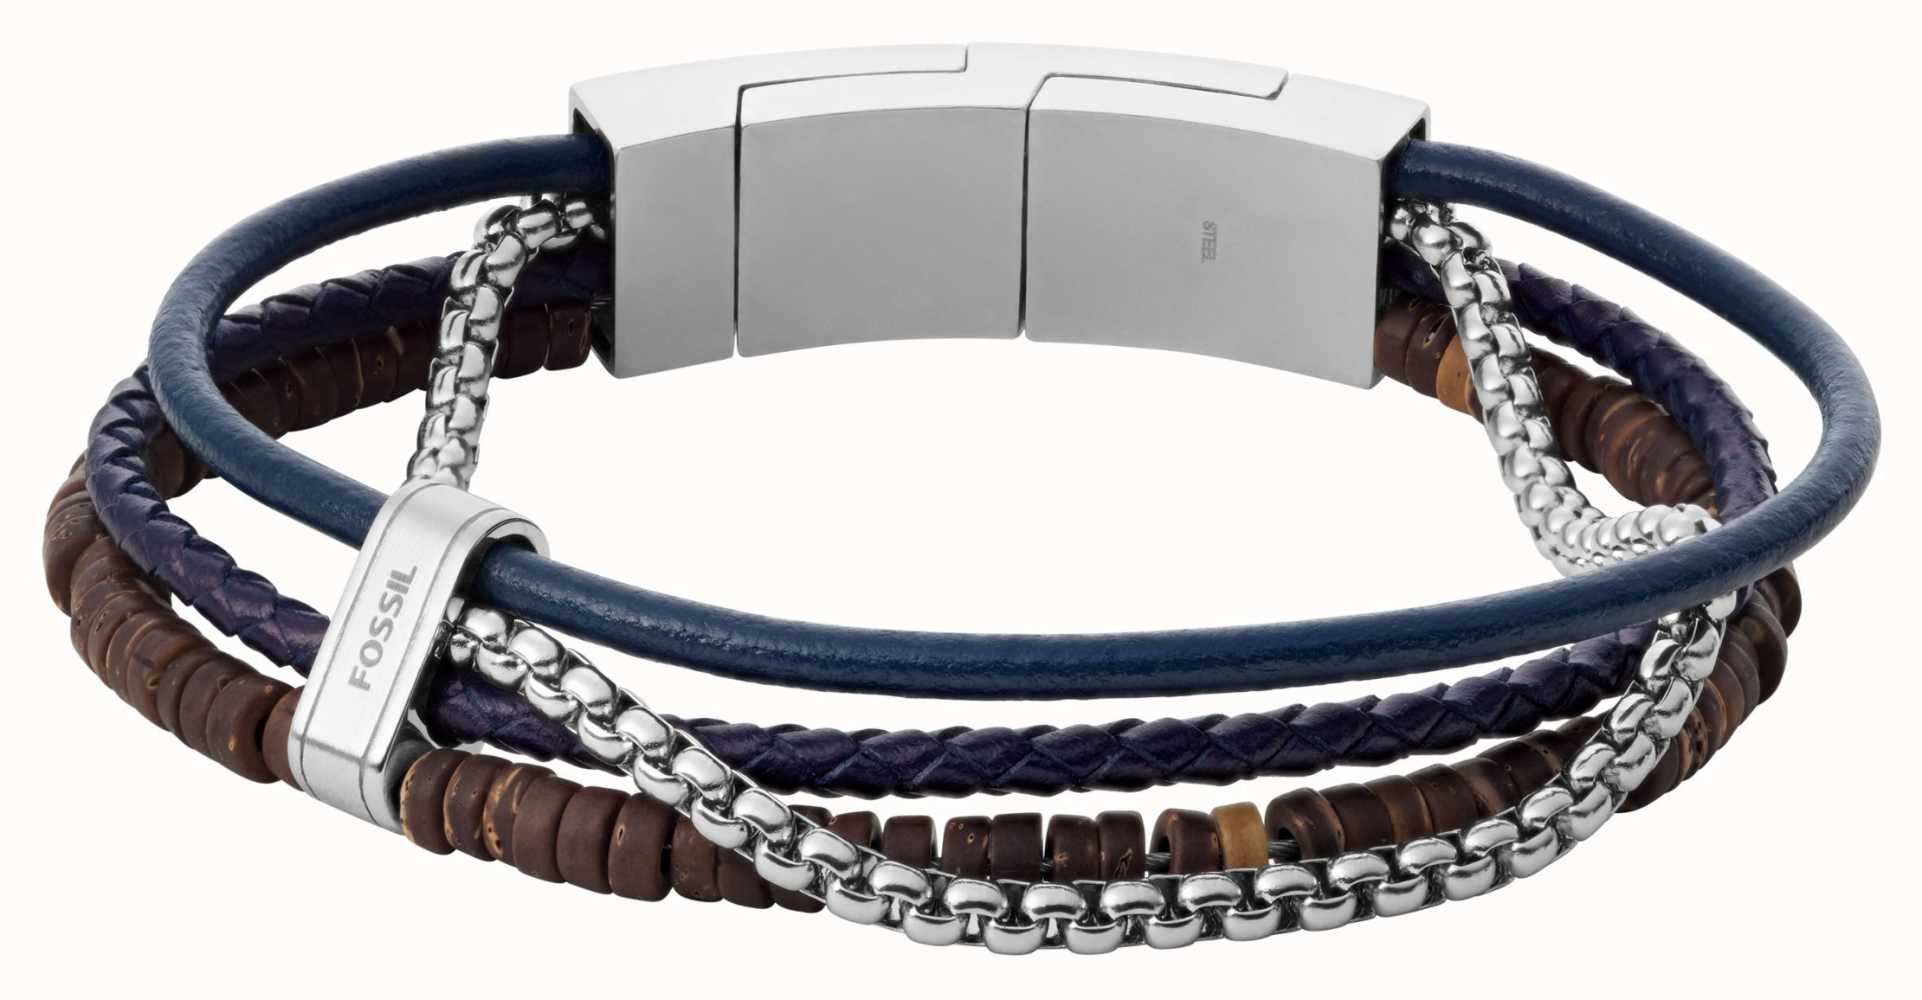 Multi-Strand Silver-Tone Steel and Brown Leather Bracelet - JF03323040 -  Fossil